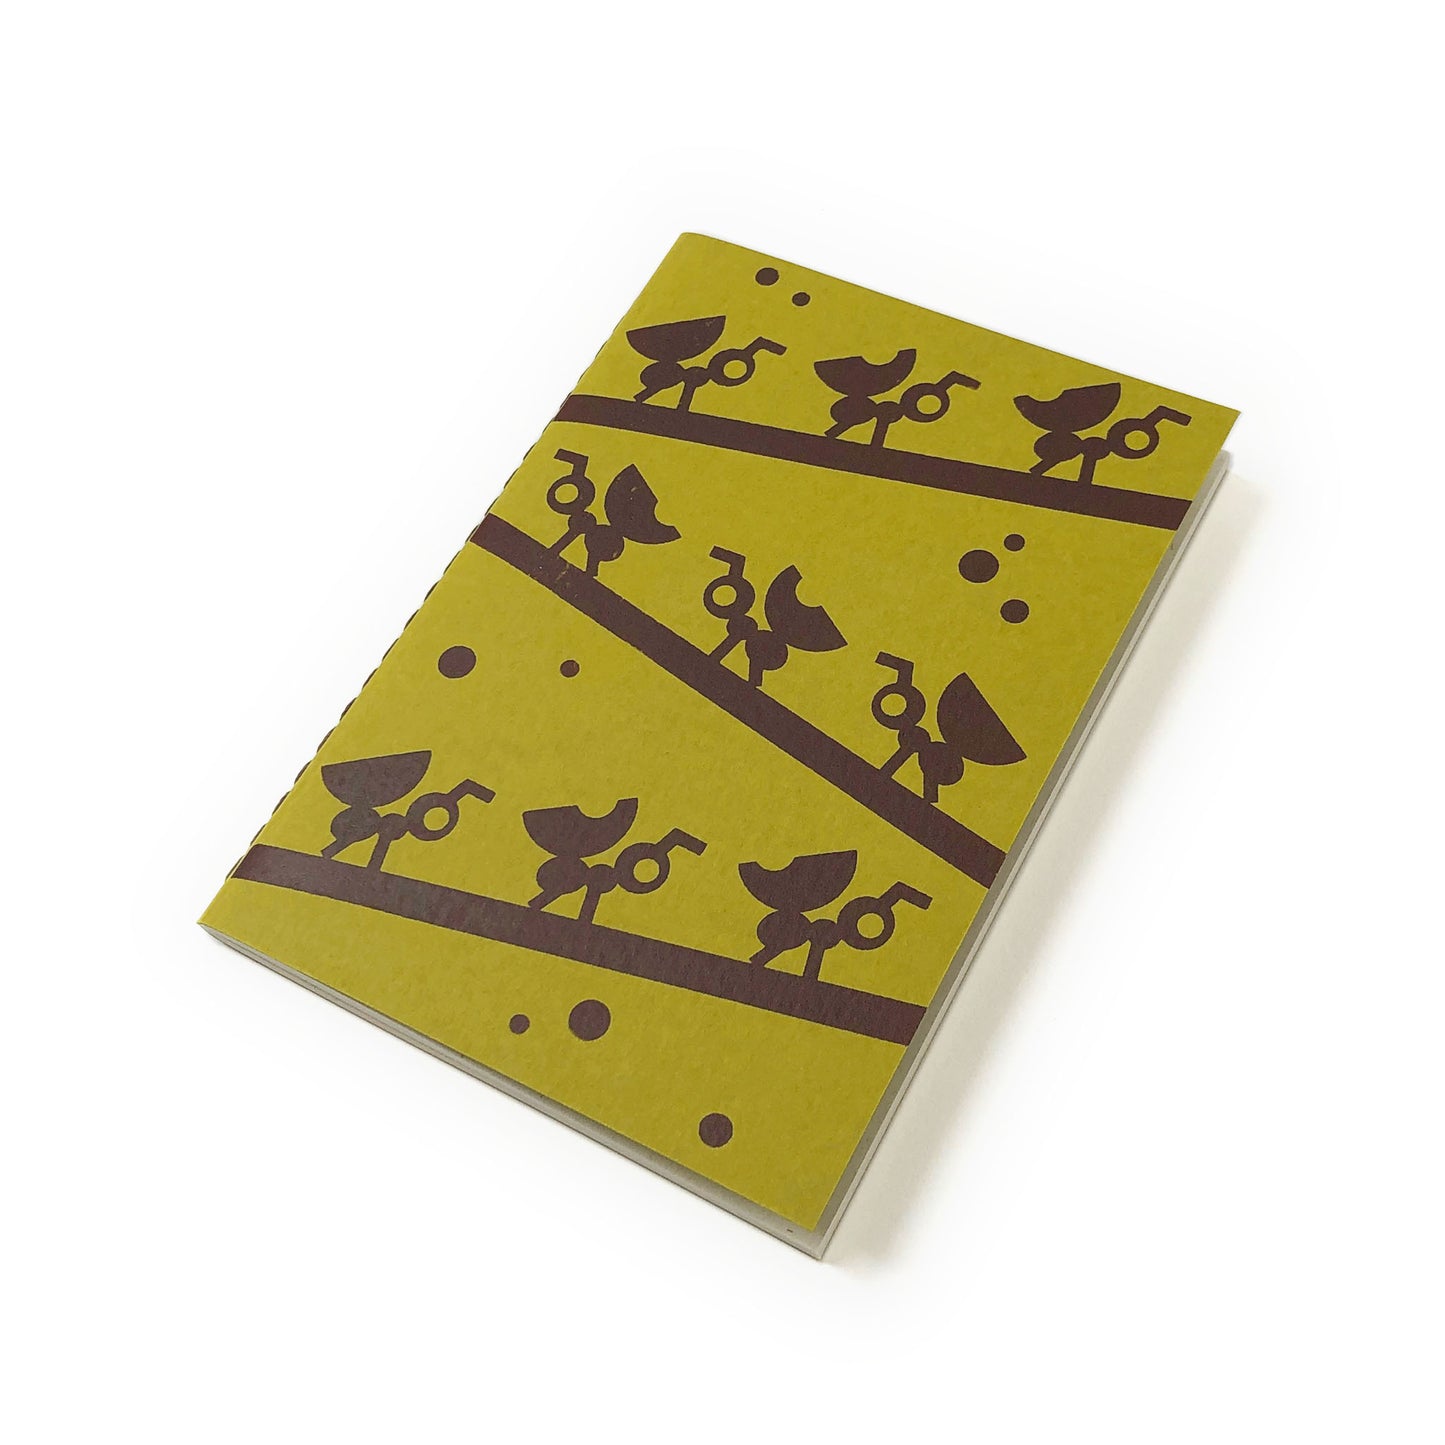 Green notebook with brown illustration of branches with ant rows, and stitched spine on white background.